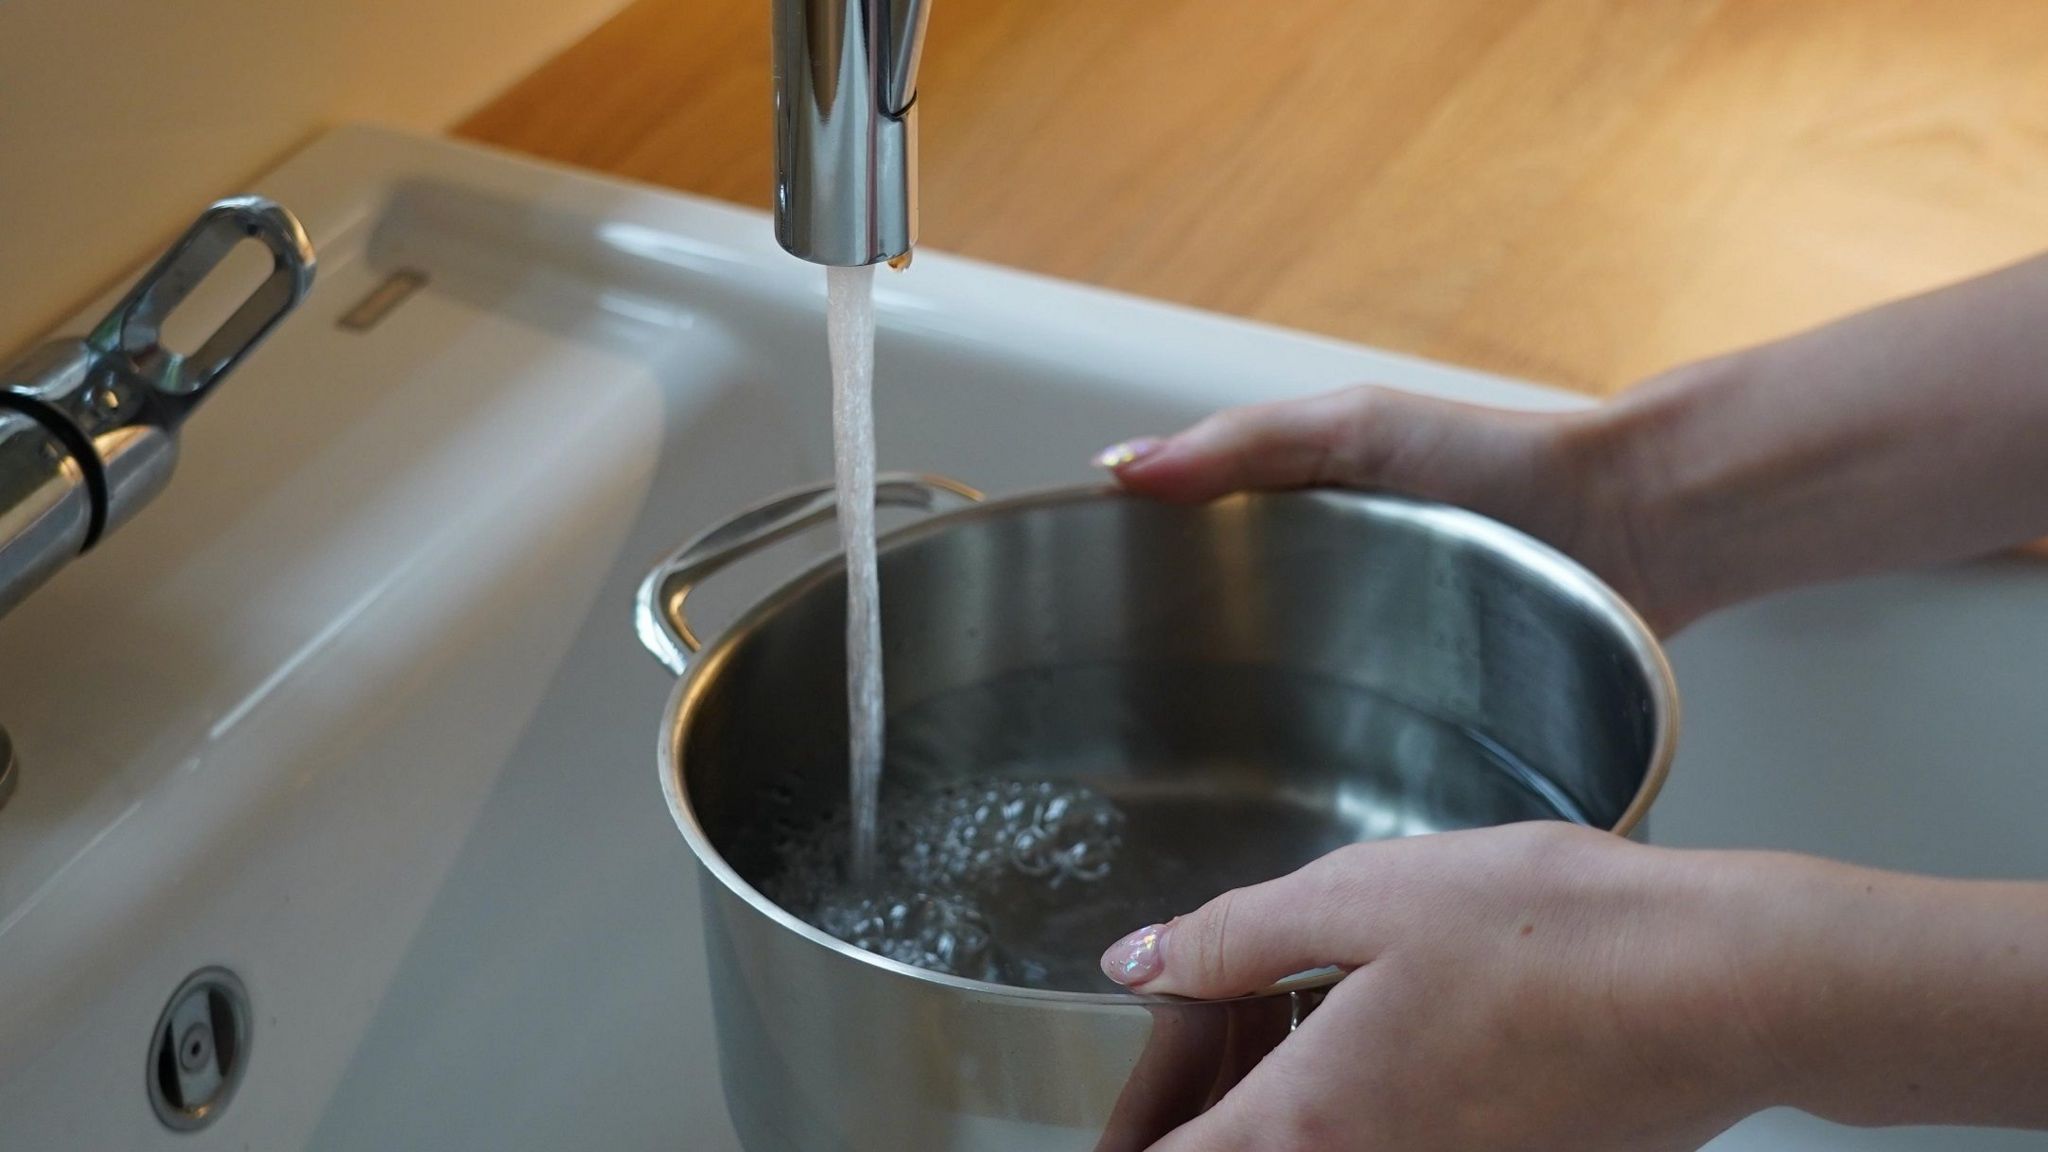 person filling pan with water from tap